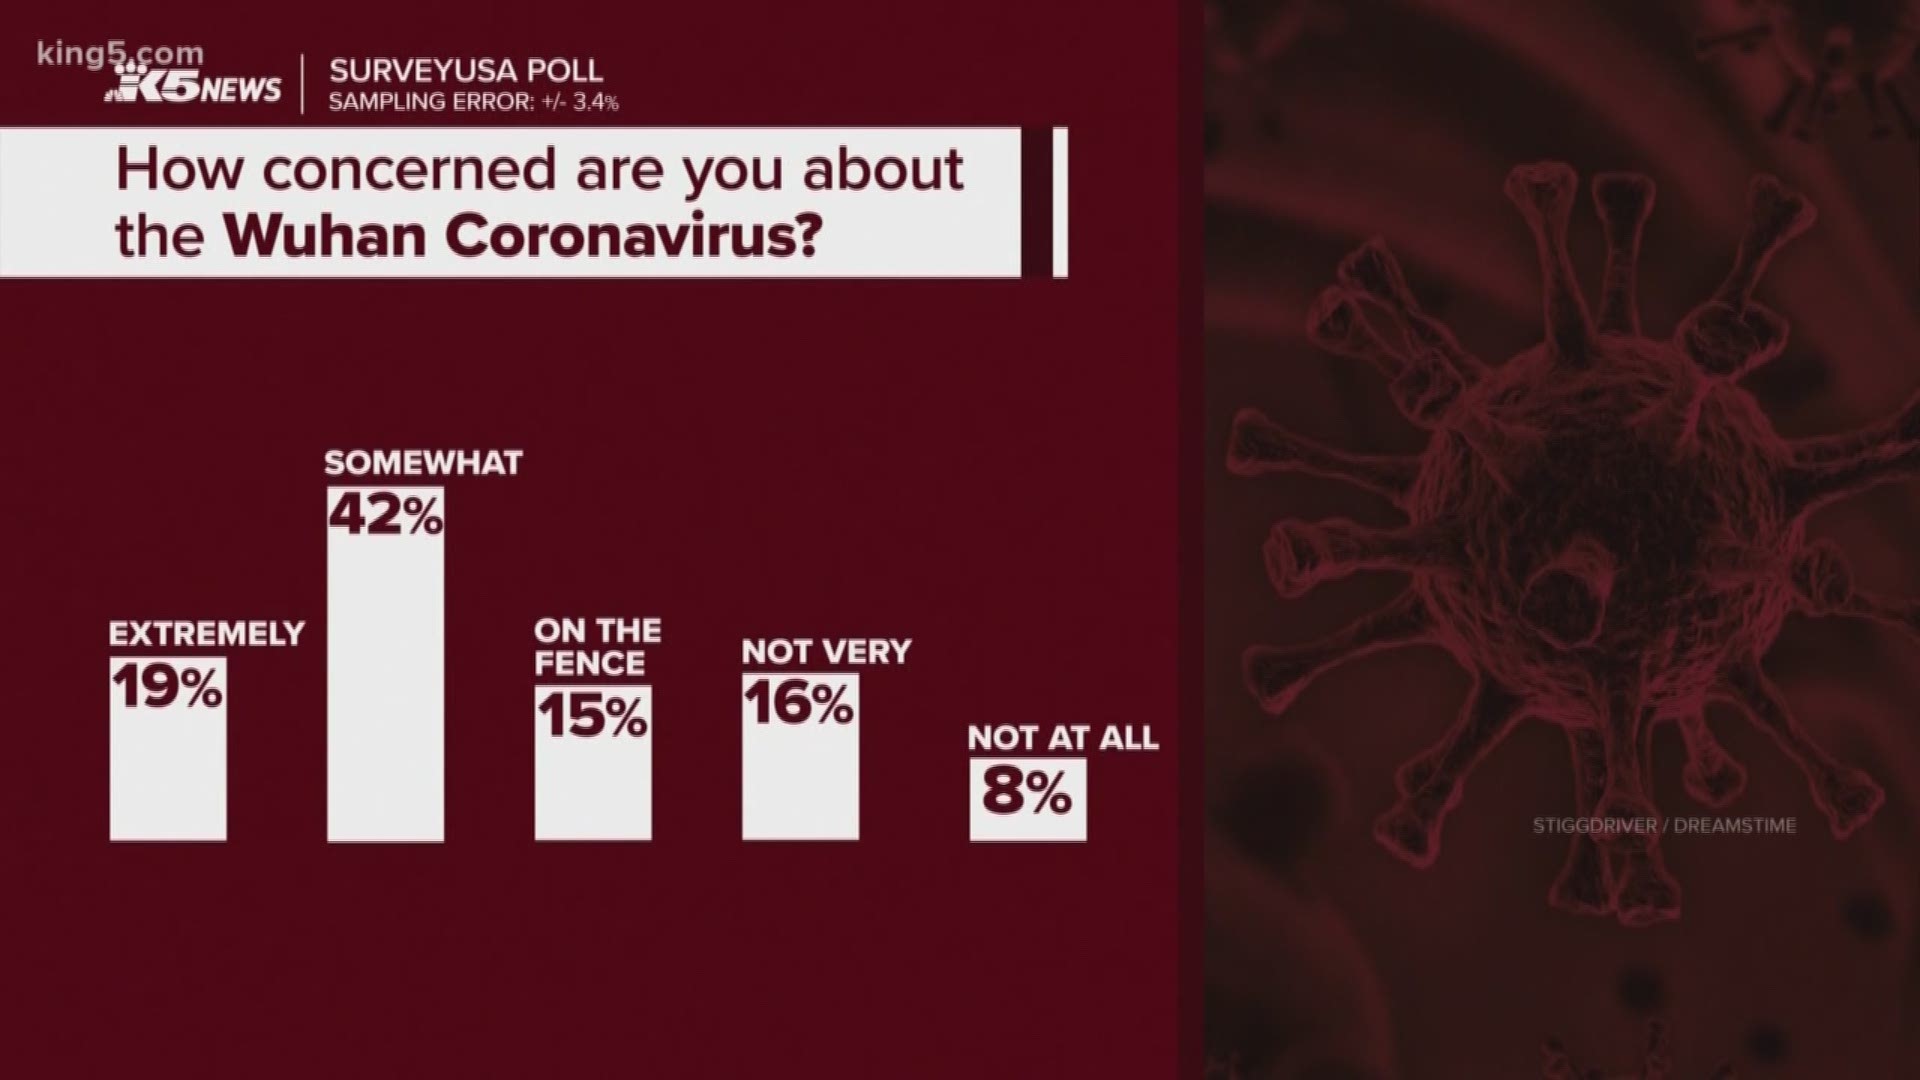 An exclusive survey conducted by KING 5 News/SurveyUSA found 42% of polled adults were somewhat concerned with the virus, and 19% were extremely concerned. Just 8% o